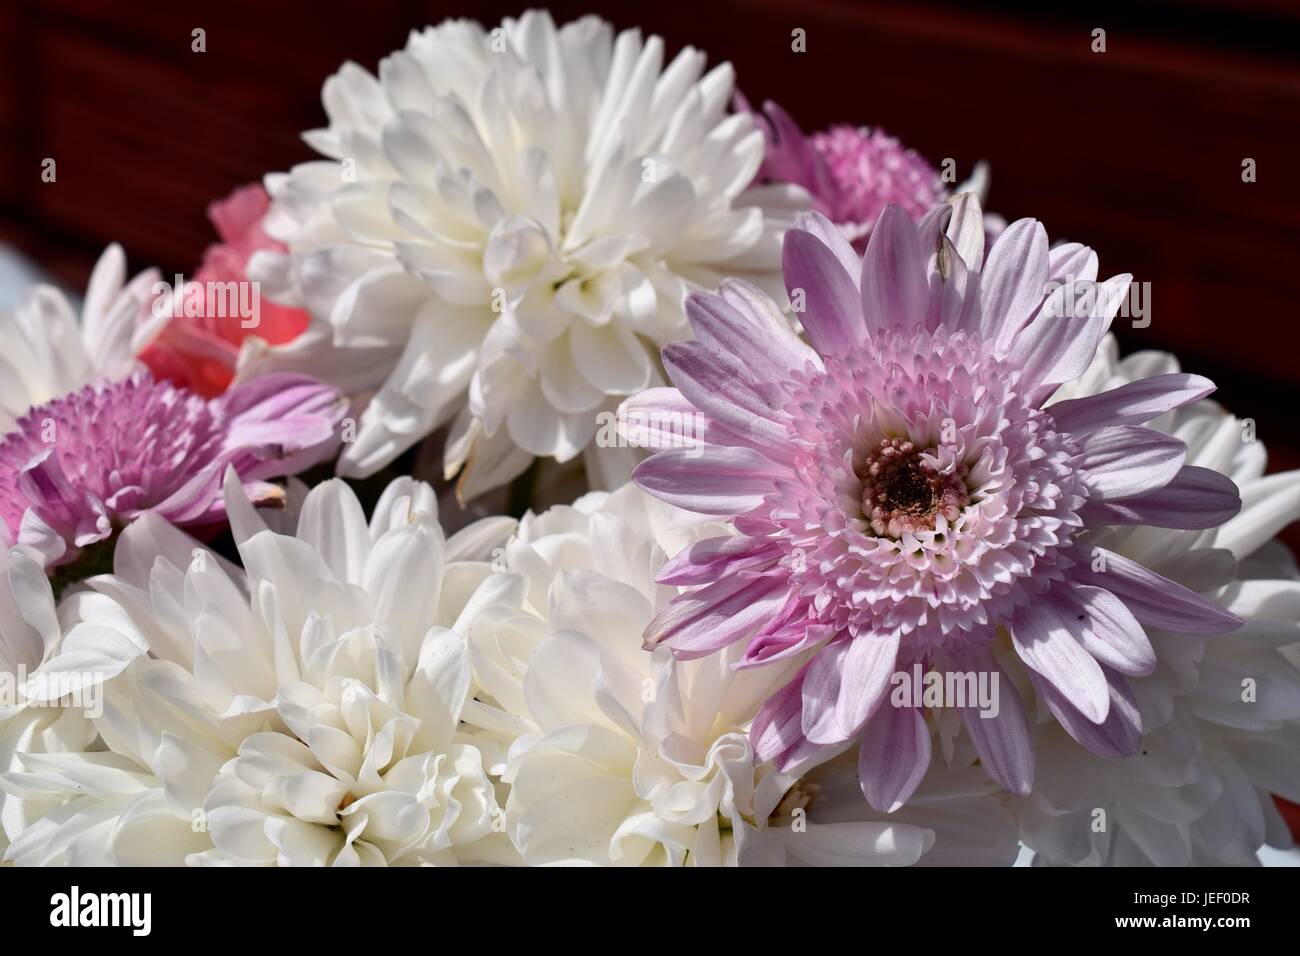 A fresh bouquet of chrysanthemums Stock Photo